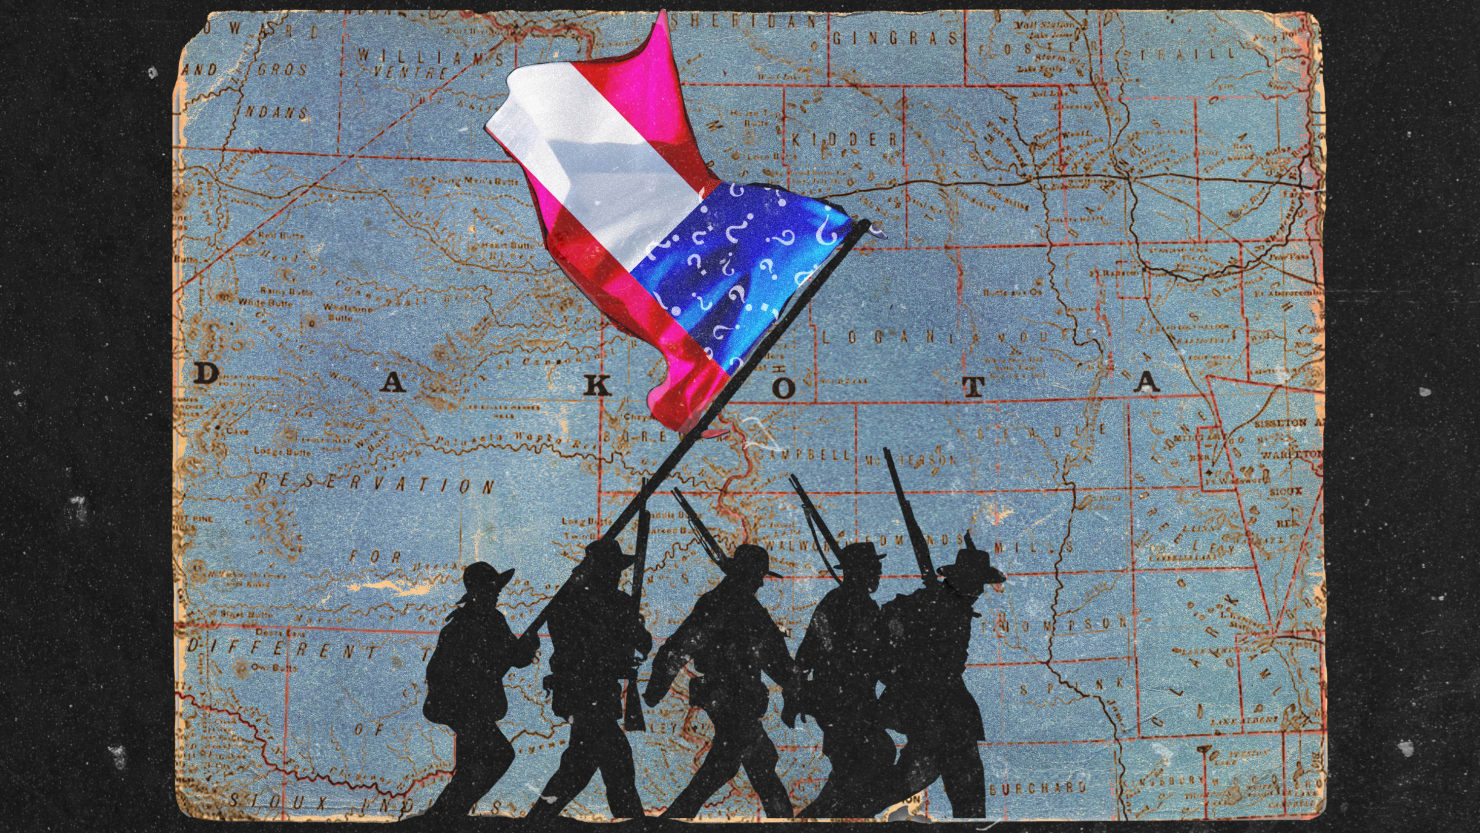 South Dakota Town of Canton to Hold Civil War Festival With Confederate Flag